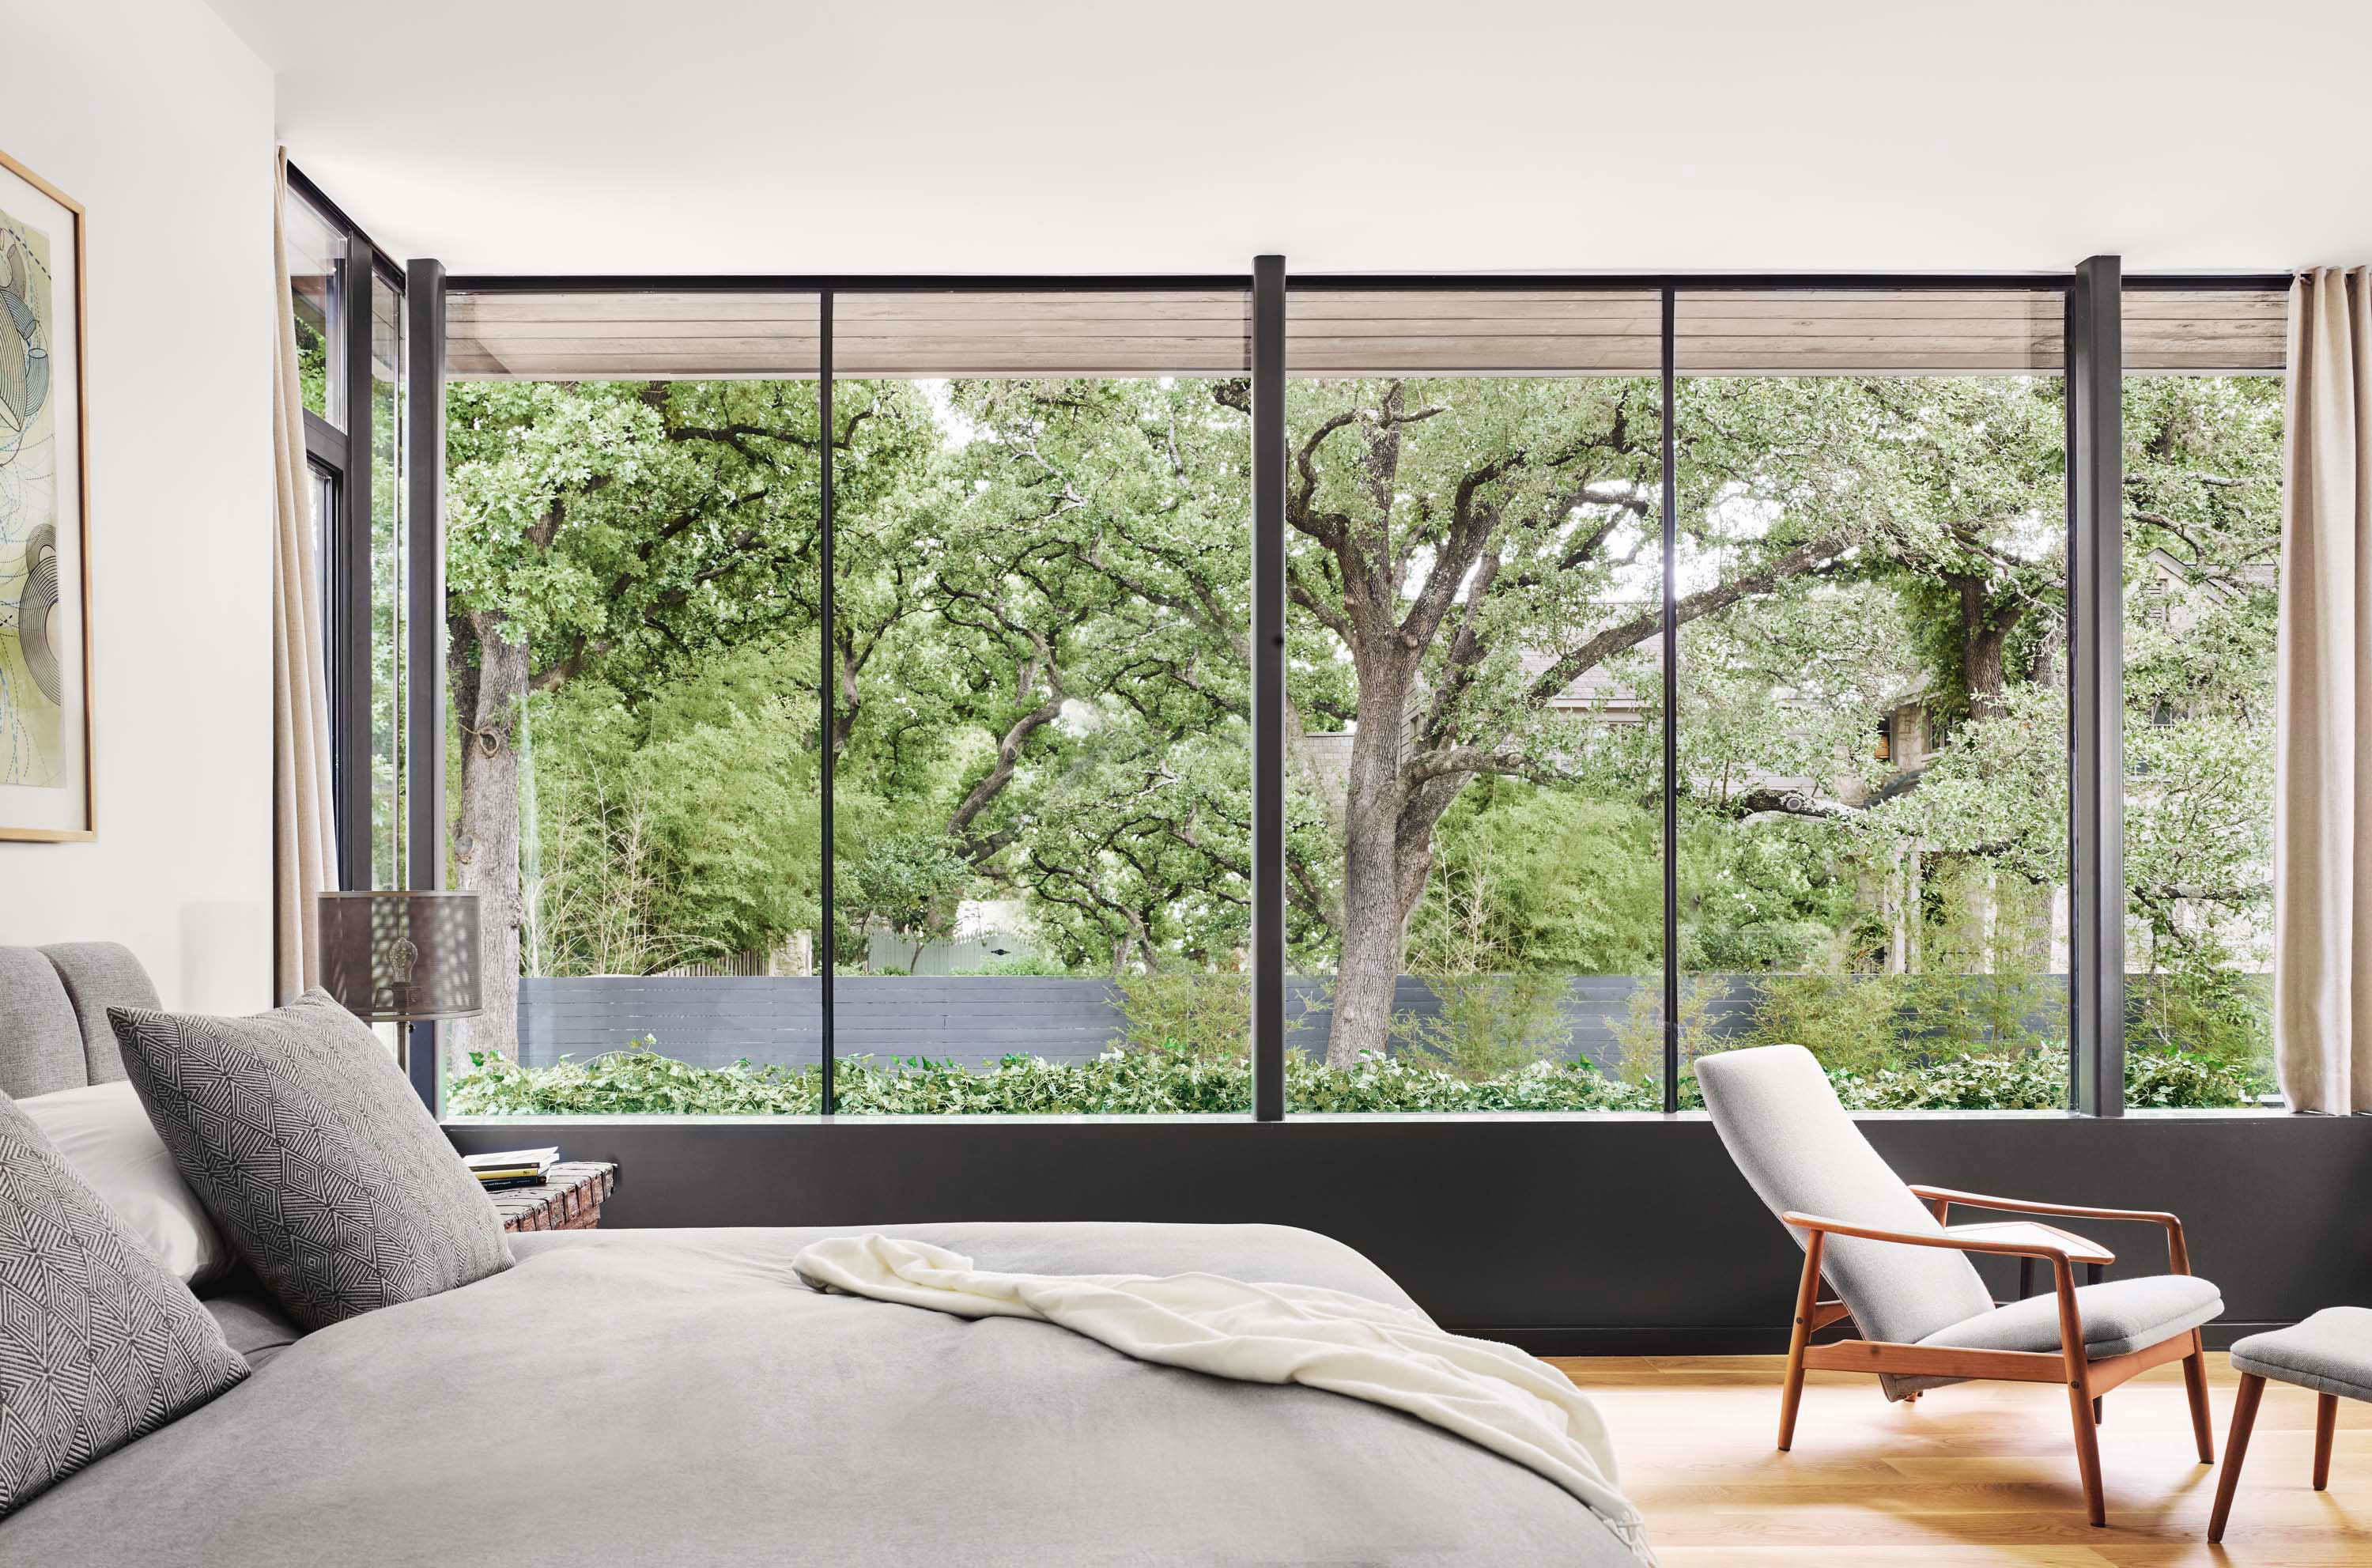 Interior photo of the Treetops House residence by Specht Novak Architects. Shot by Casey Dunn, featuring a bedroom with wooden floors, and frameless glass windows that showcase the natural surroundings of the home.